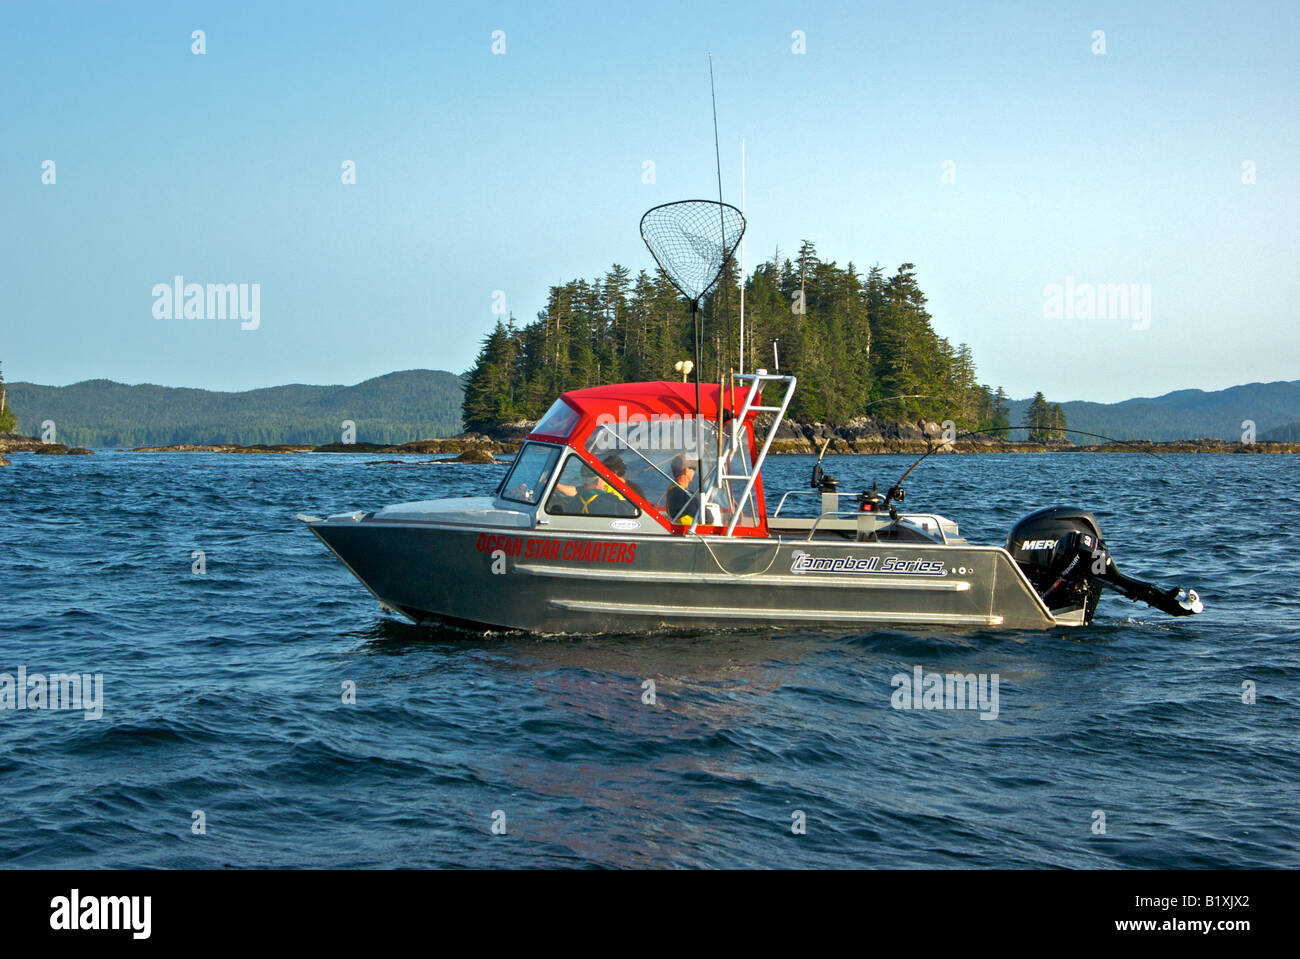 Sport fish boat troll fishing for salmon using downriggers and rods with single action reels Stock Photo